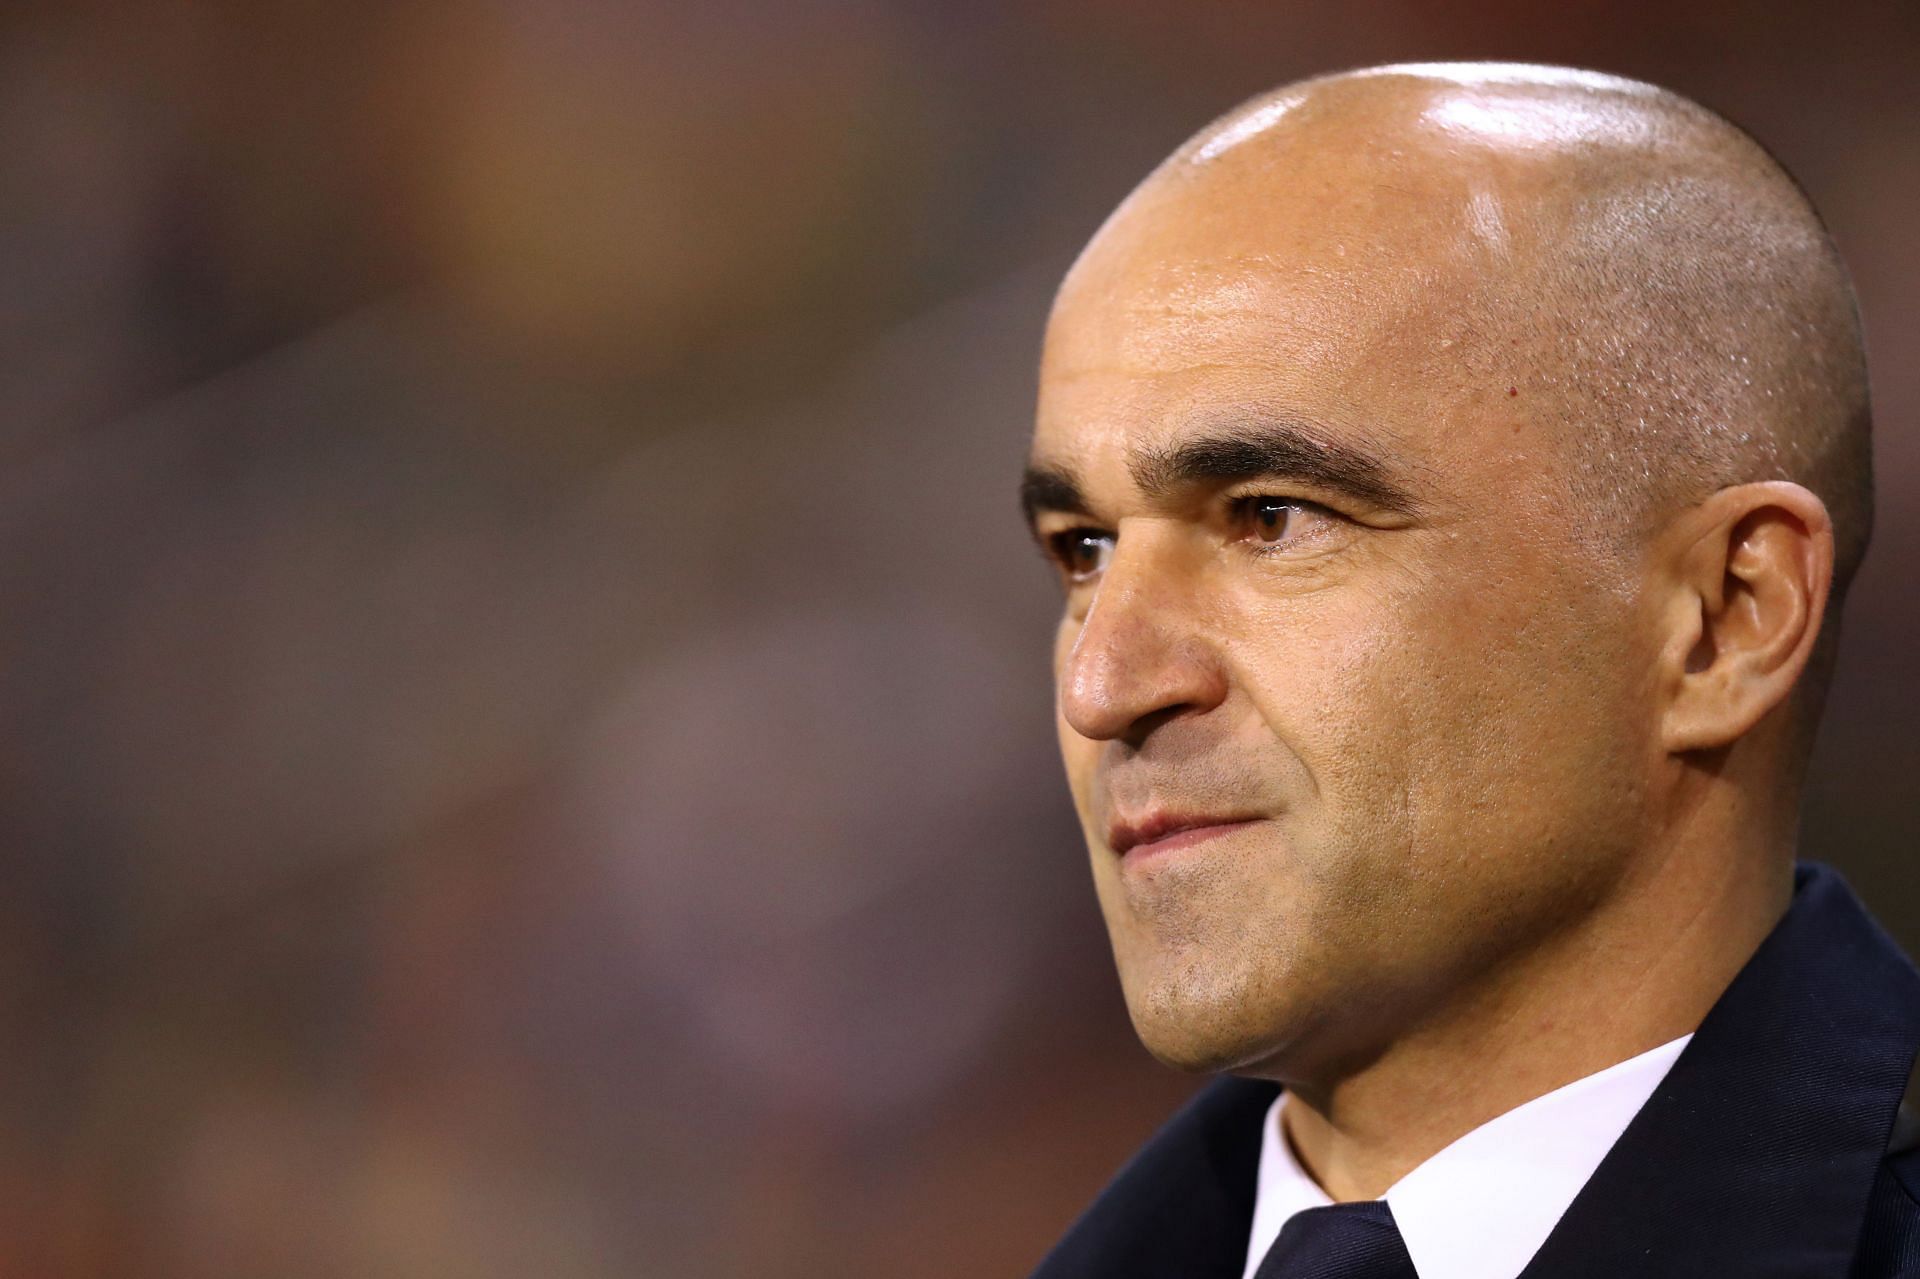 Roberto Martinez is doing quite well with the Belgian national team